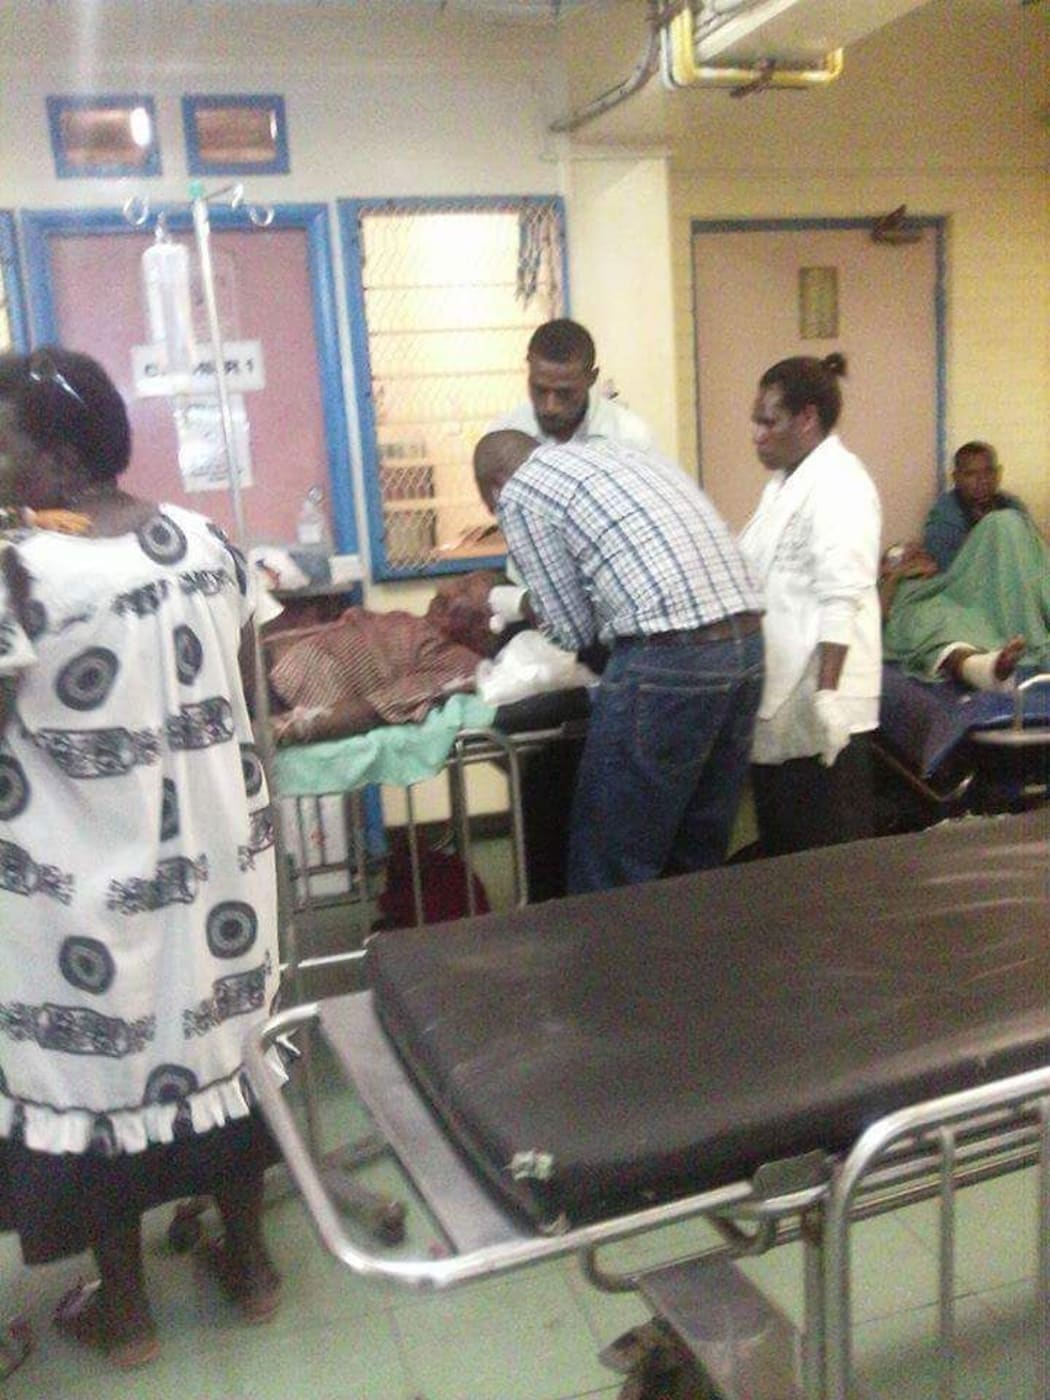 Goroka Hospital treats people injured in fighting in the capital of Papua New Guinea's Eastern highlands province, 14 June 2016.